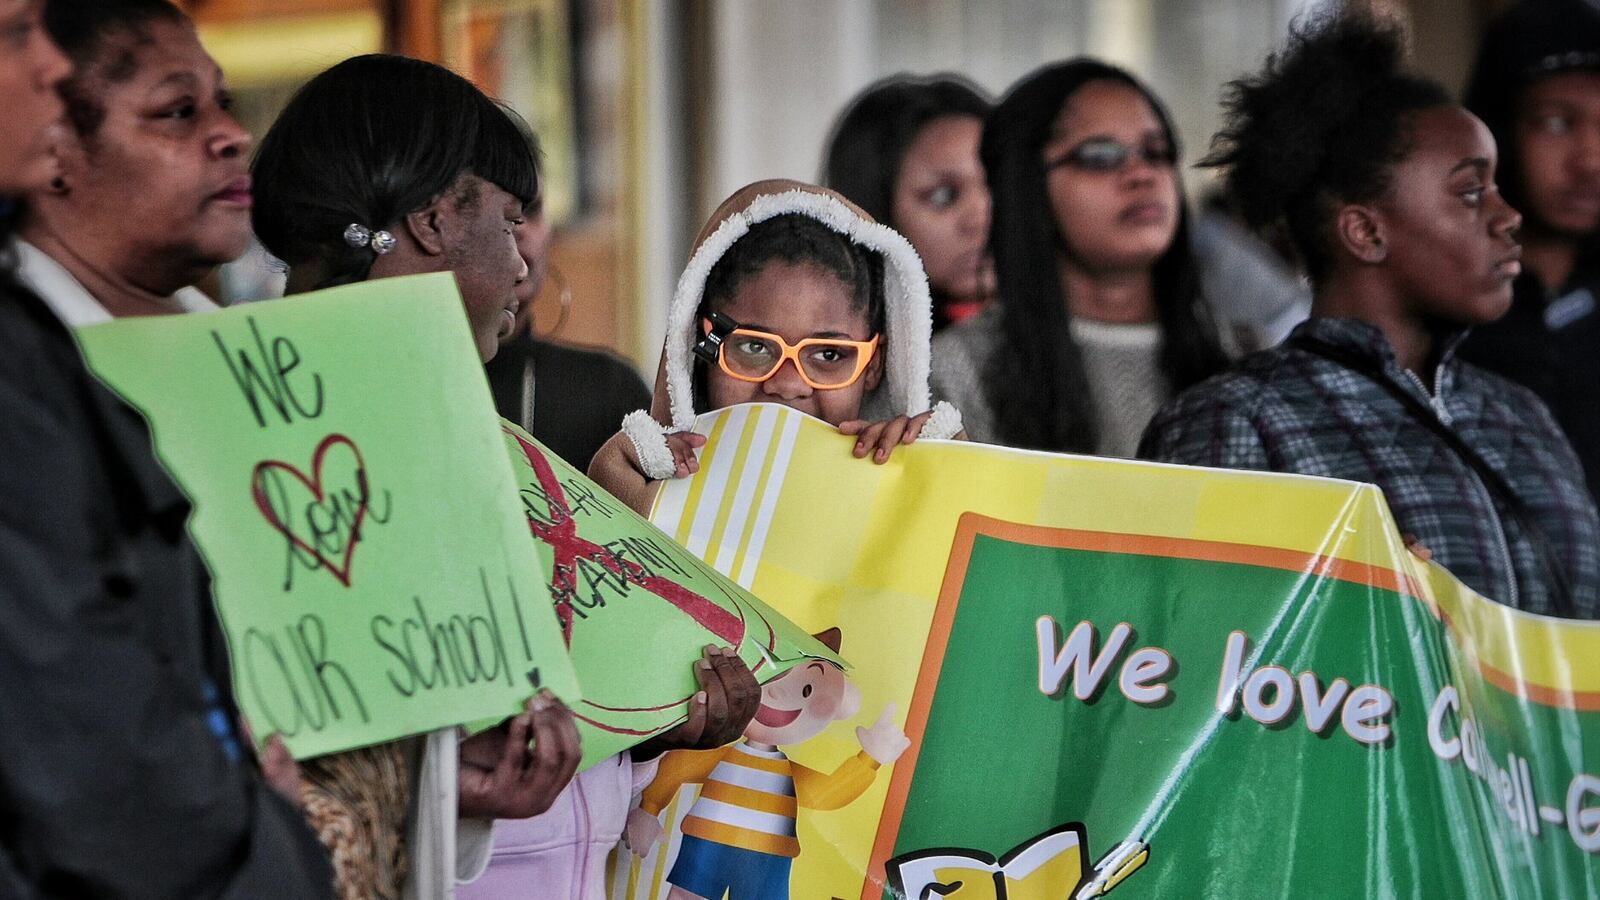 A student listens as parents and advocates protest the Achievement School District’s charter matching process in 2015.